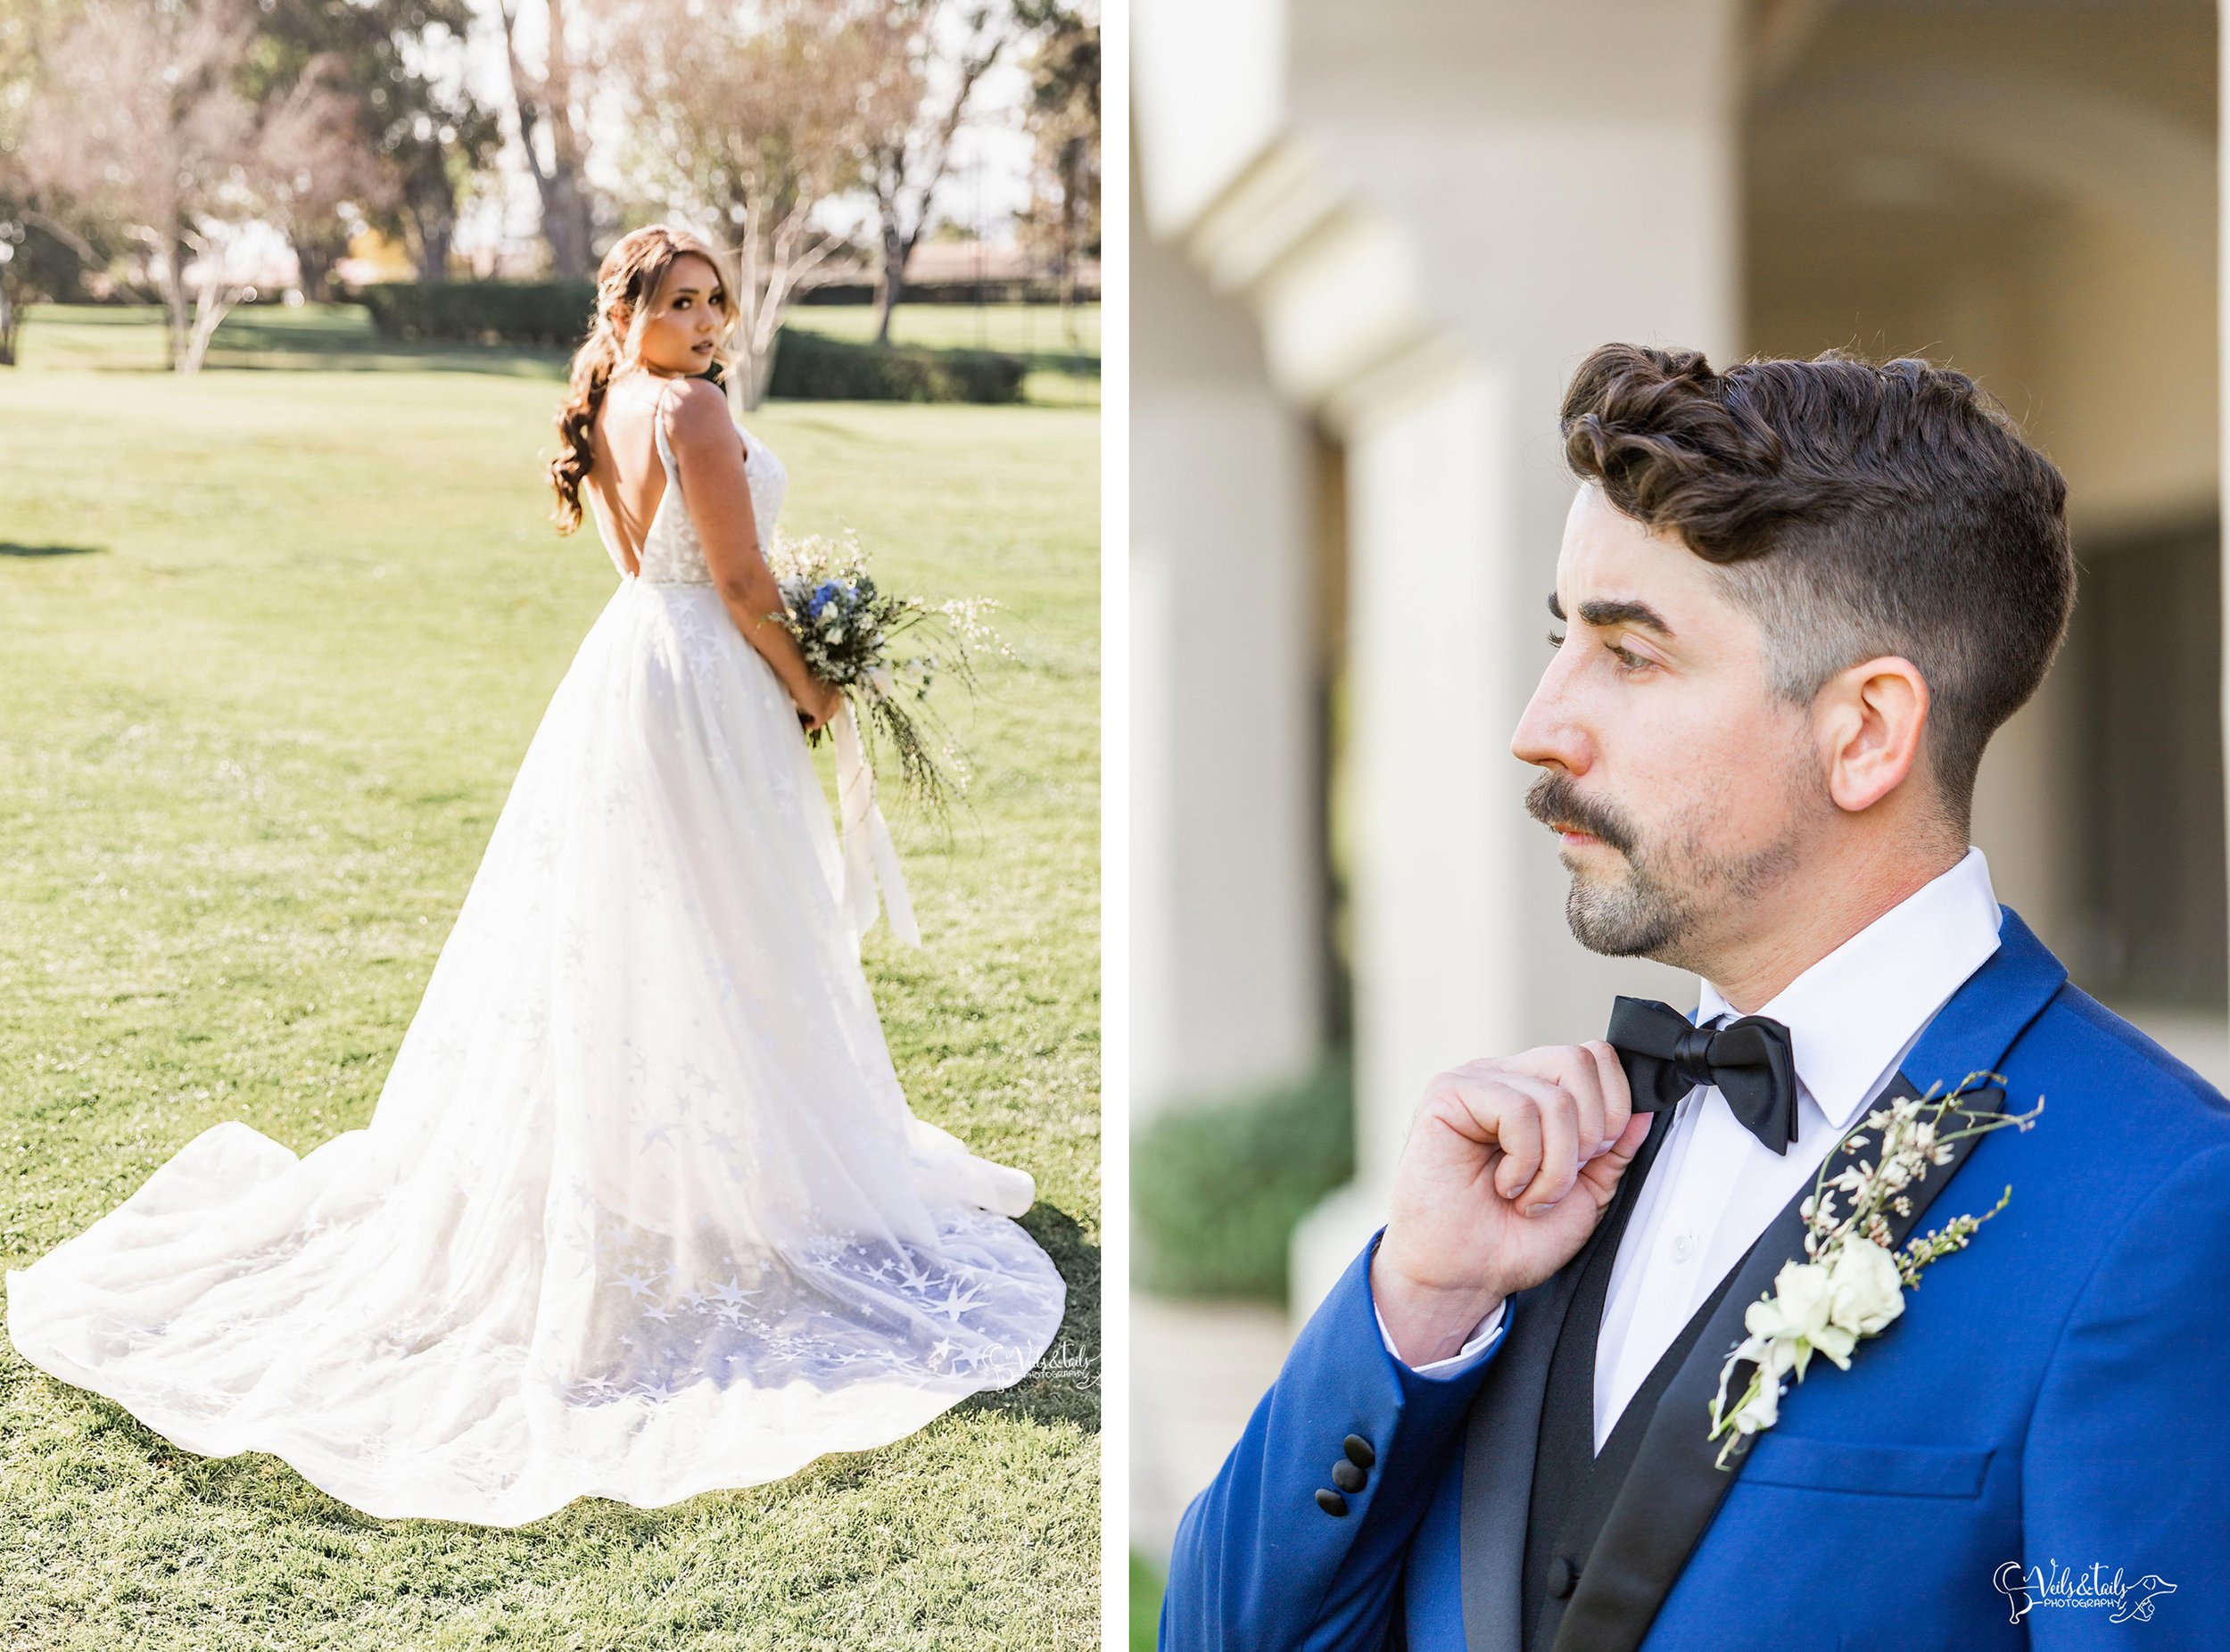 moon and stars themed wedding, Veils &amp; Tails Photography, Santa Barbara photographer, South Hills Country Club